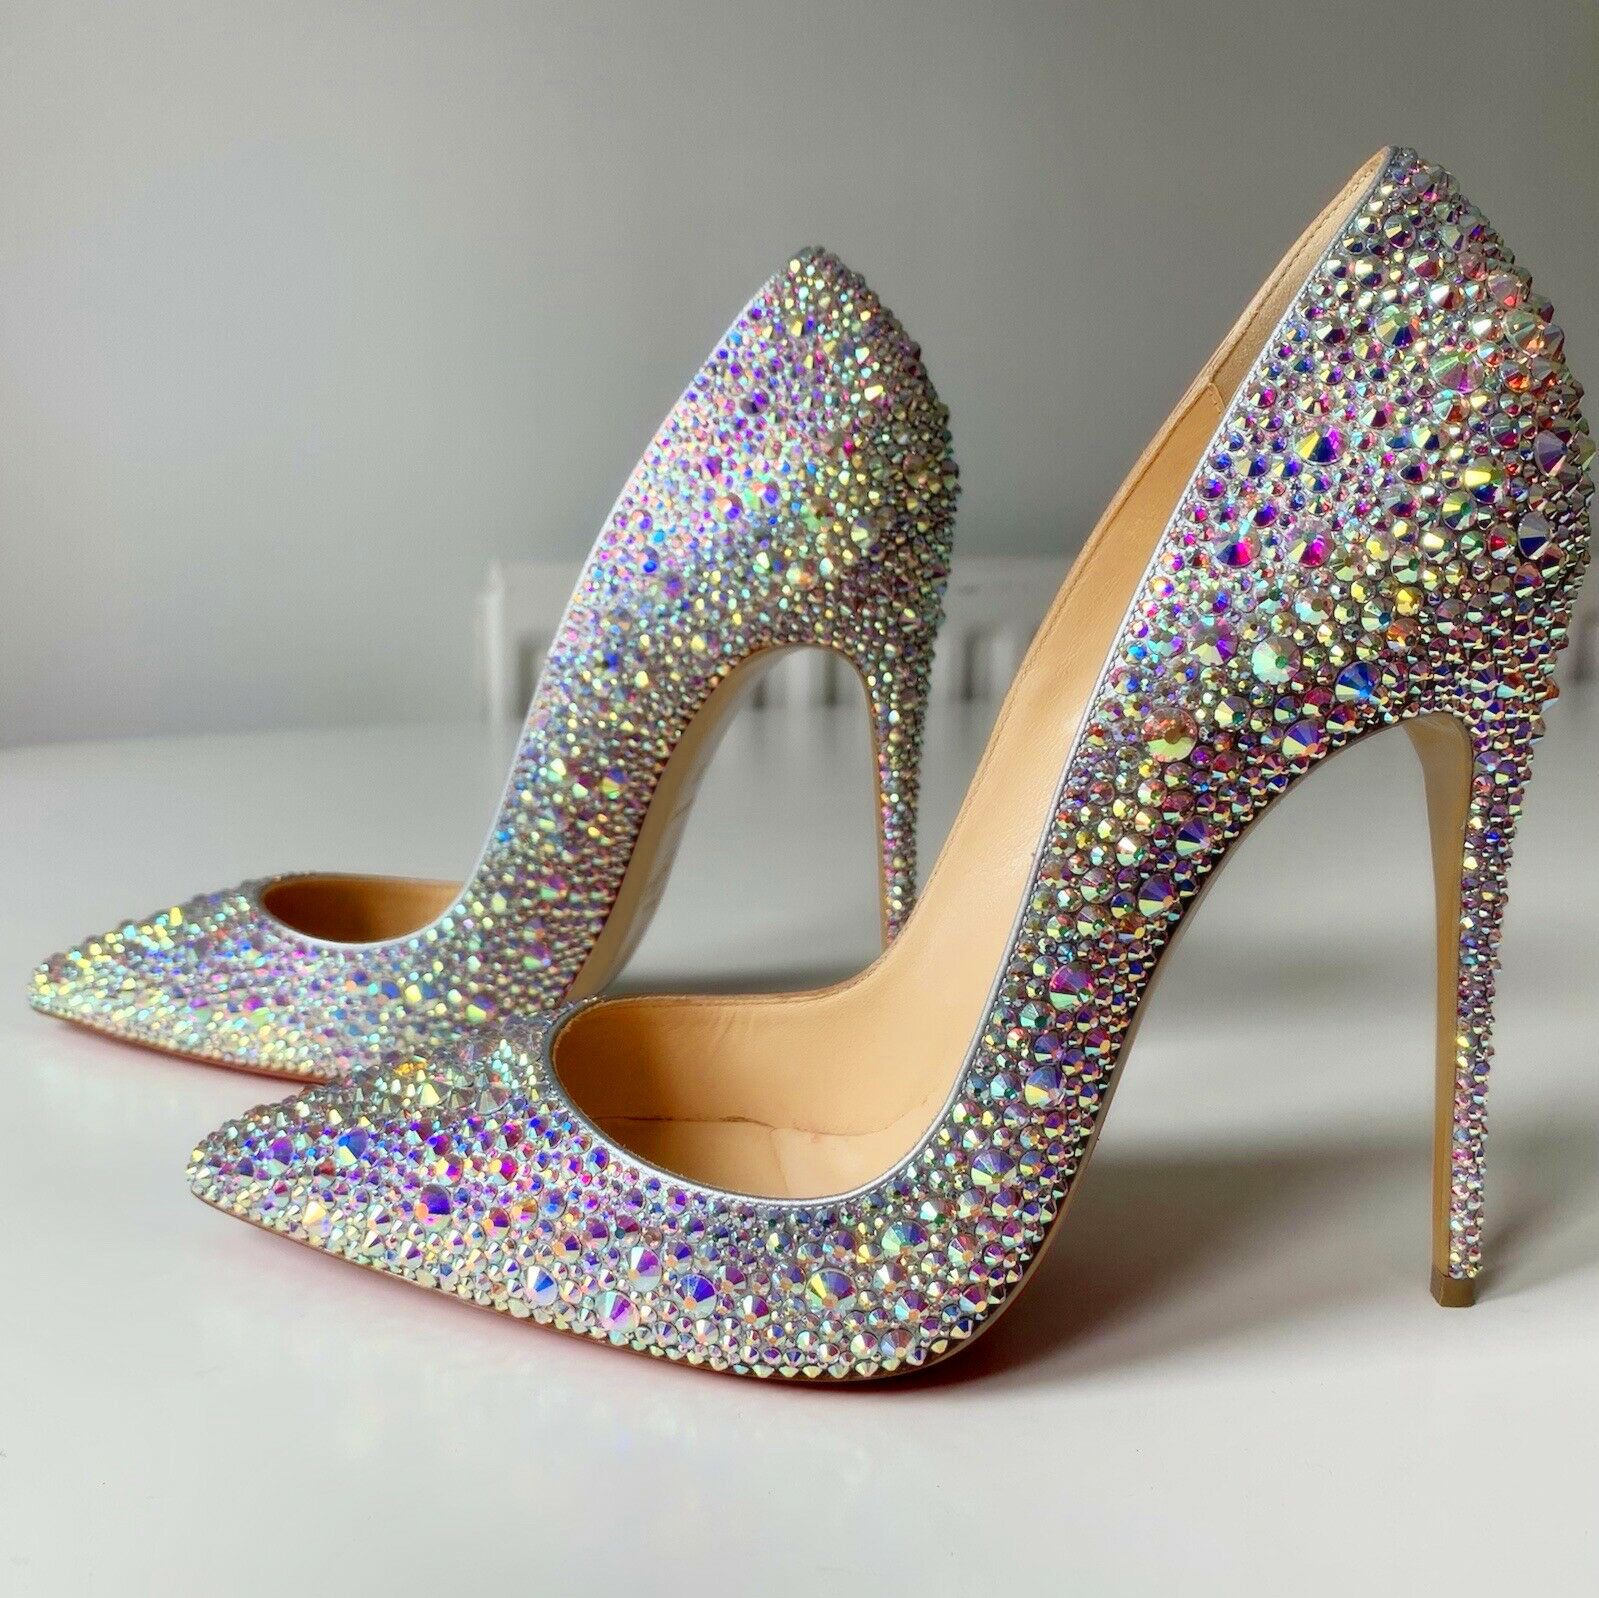 Casual Sexy Lady Fashion Women Shoes Crystal Glitter Strass Pointy Toe Stiletto High Heels Zapatos Mujer Prom Evening Pumps Large 44 12cm From Happyday818, $70.36 | DHgate.Com